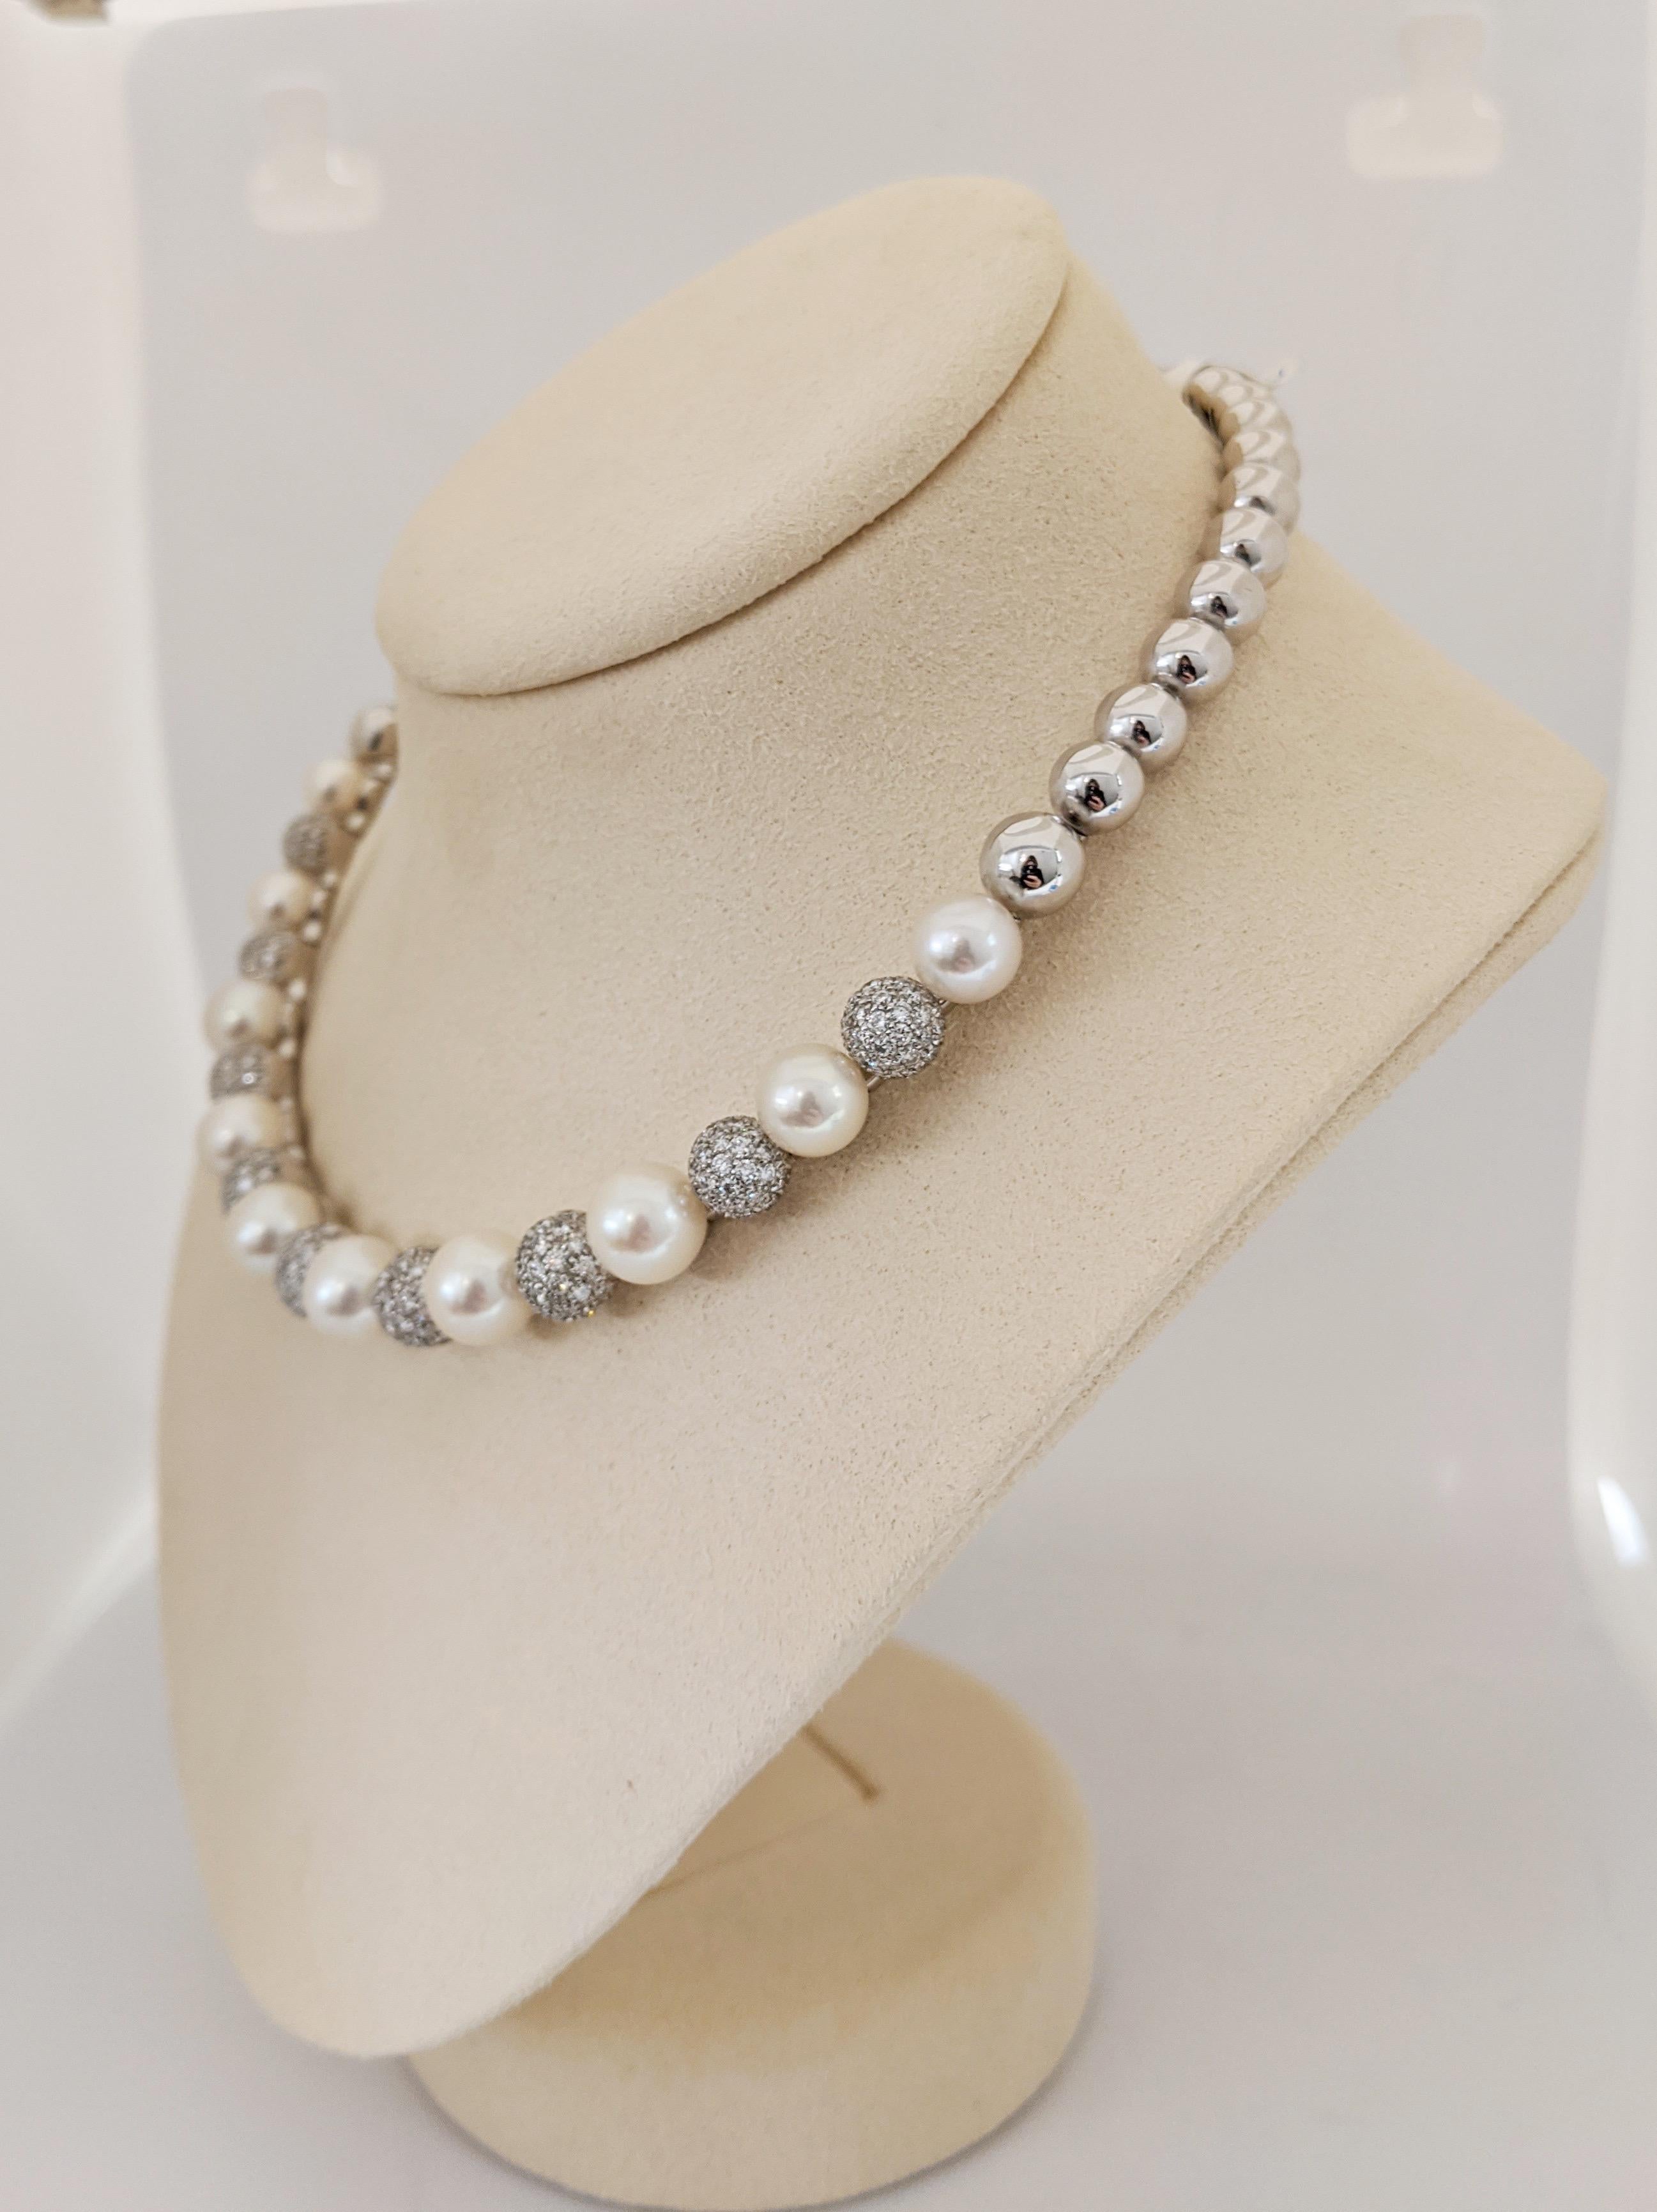 Women's or Men's 18 Karat White Gold, 4.39 Carat Diamond and Cultured Pearl Choker Necklace For Sale